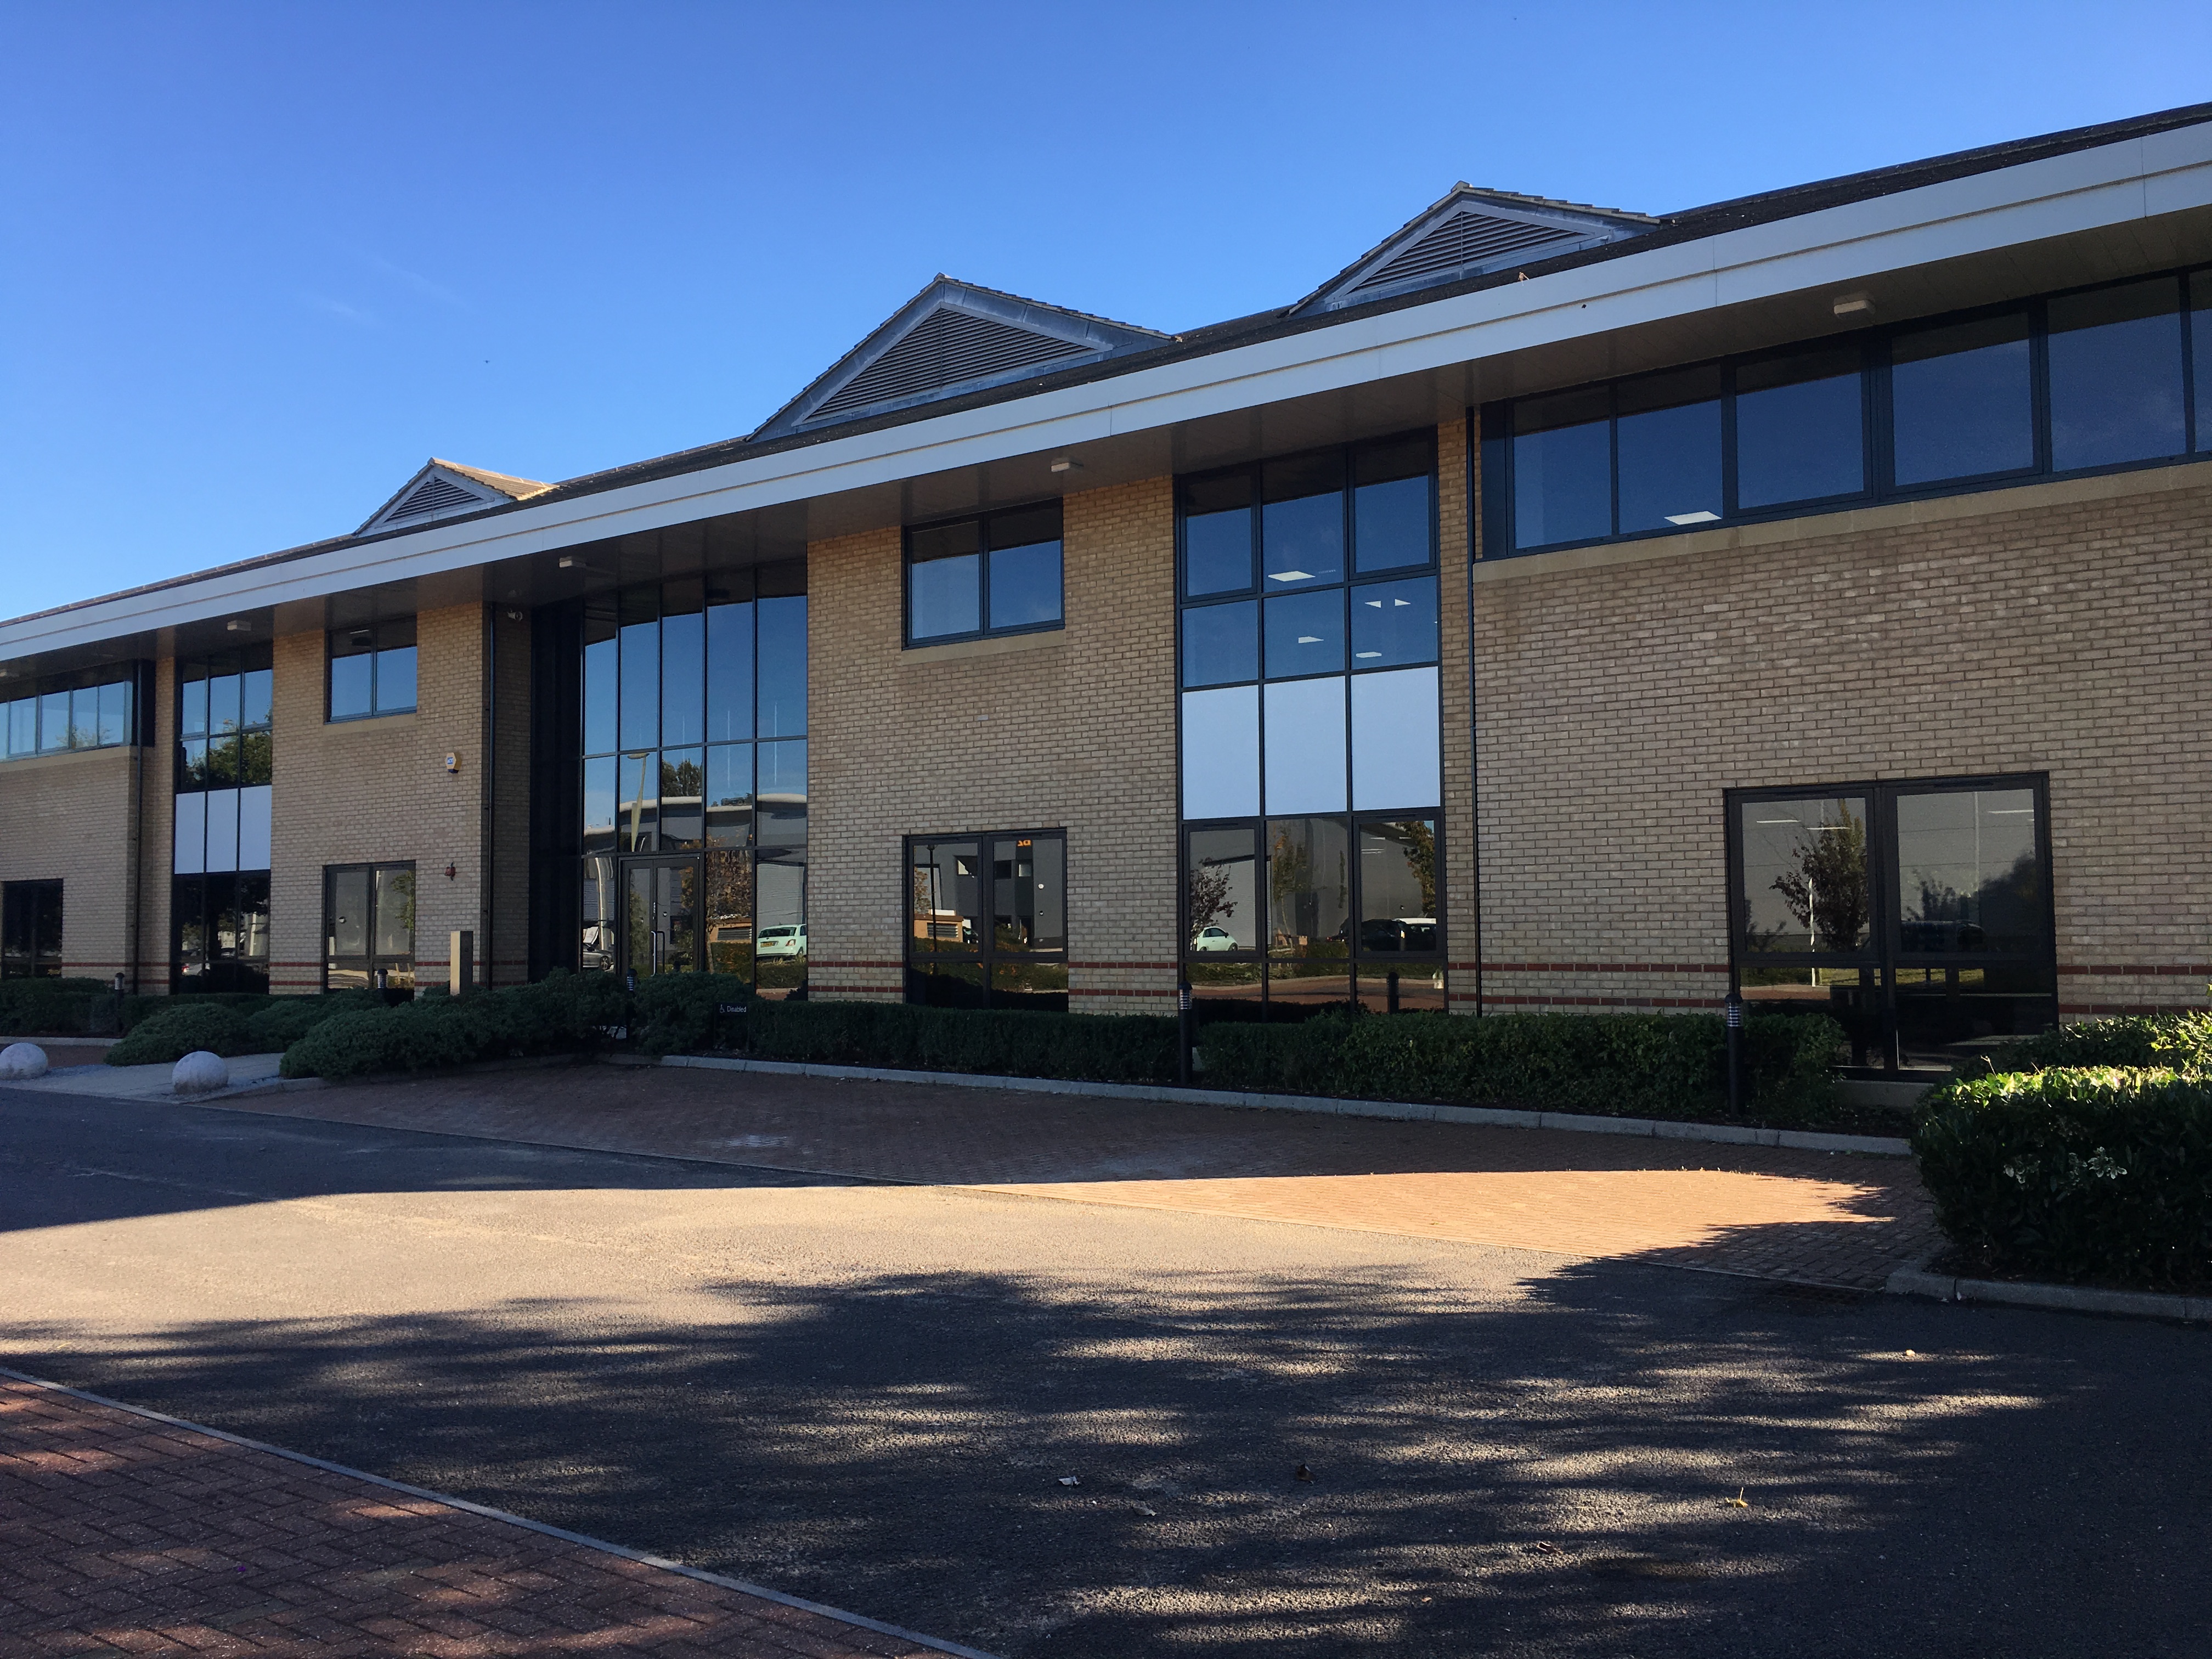 Post-lockdown flexible working arrives in Oxfordshire with latest letting at Grange Court on Abingdon Science Park